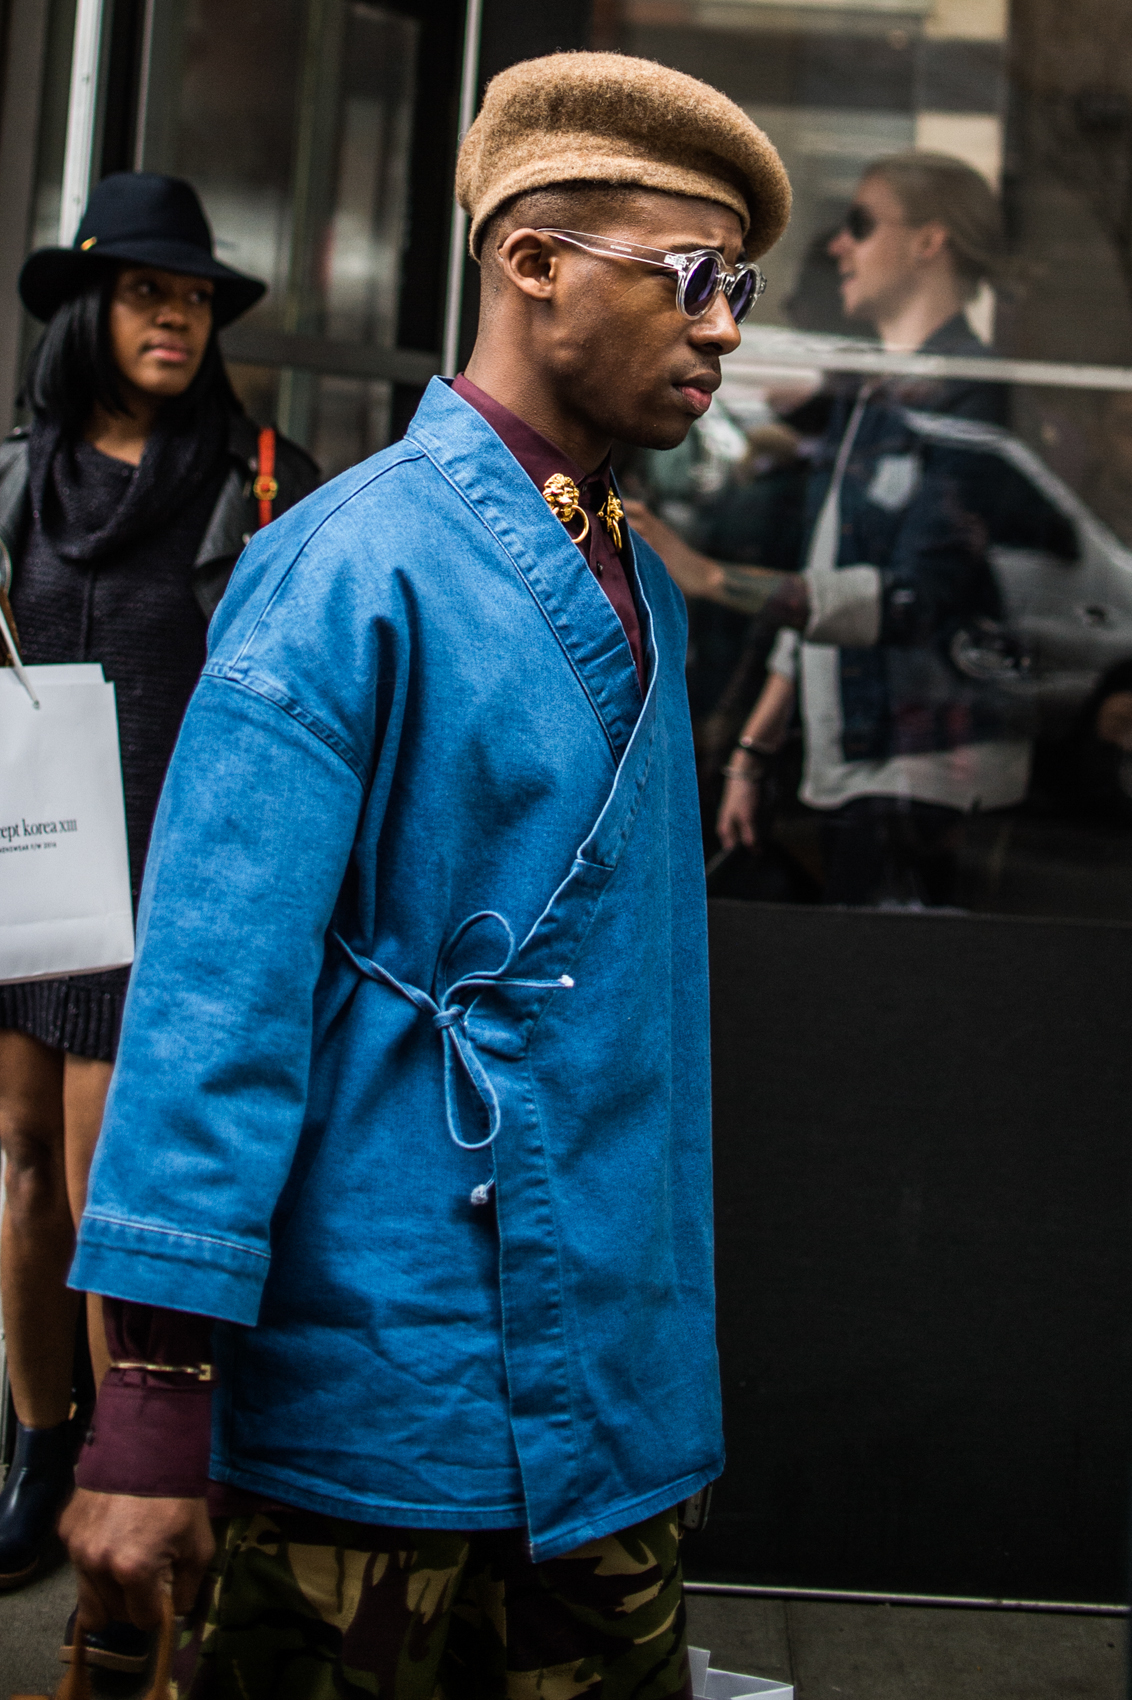 The 35 Best Street Style Looks From New York Men’s Fashion Week | Sharp ...